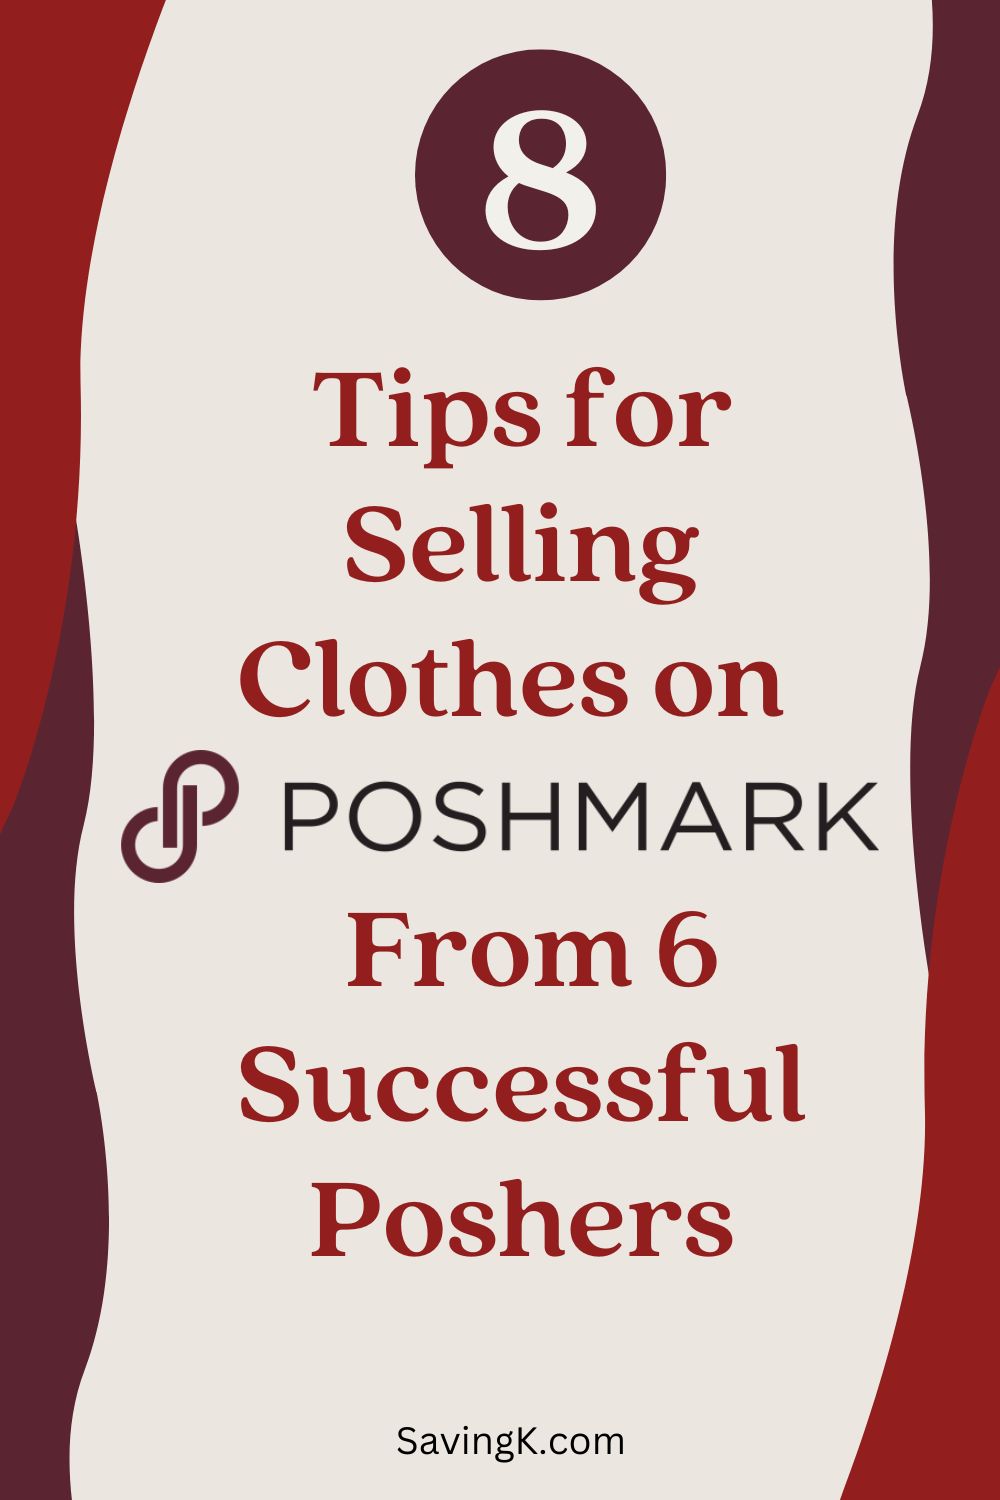 8 Tips for Selling Clothes on Poshmark from 6 successful Poshers